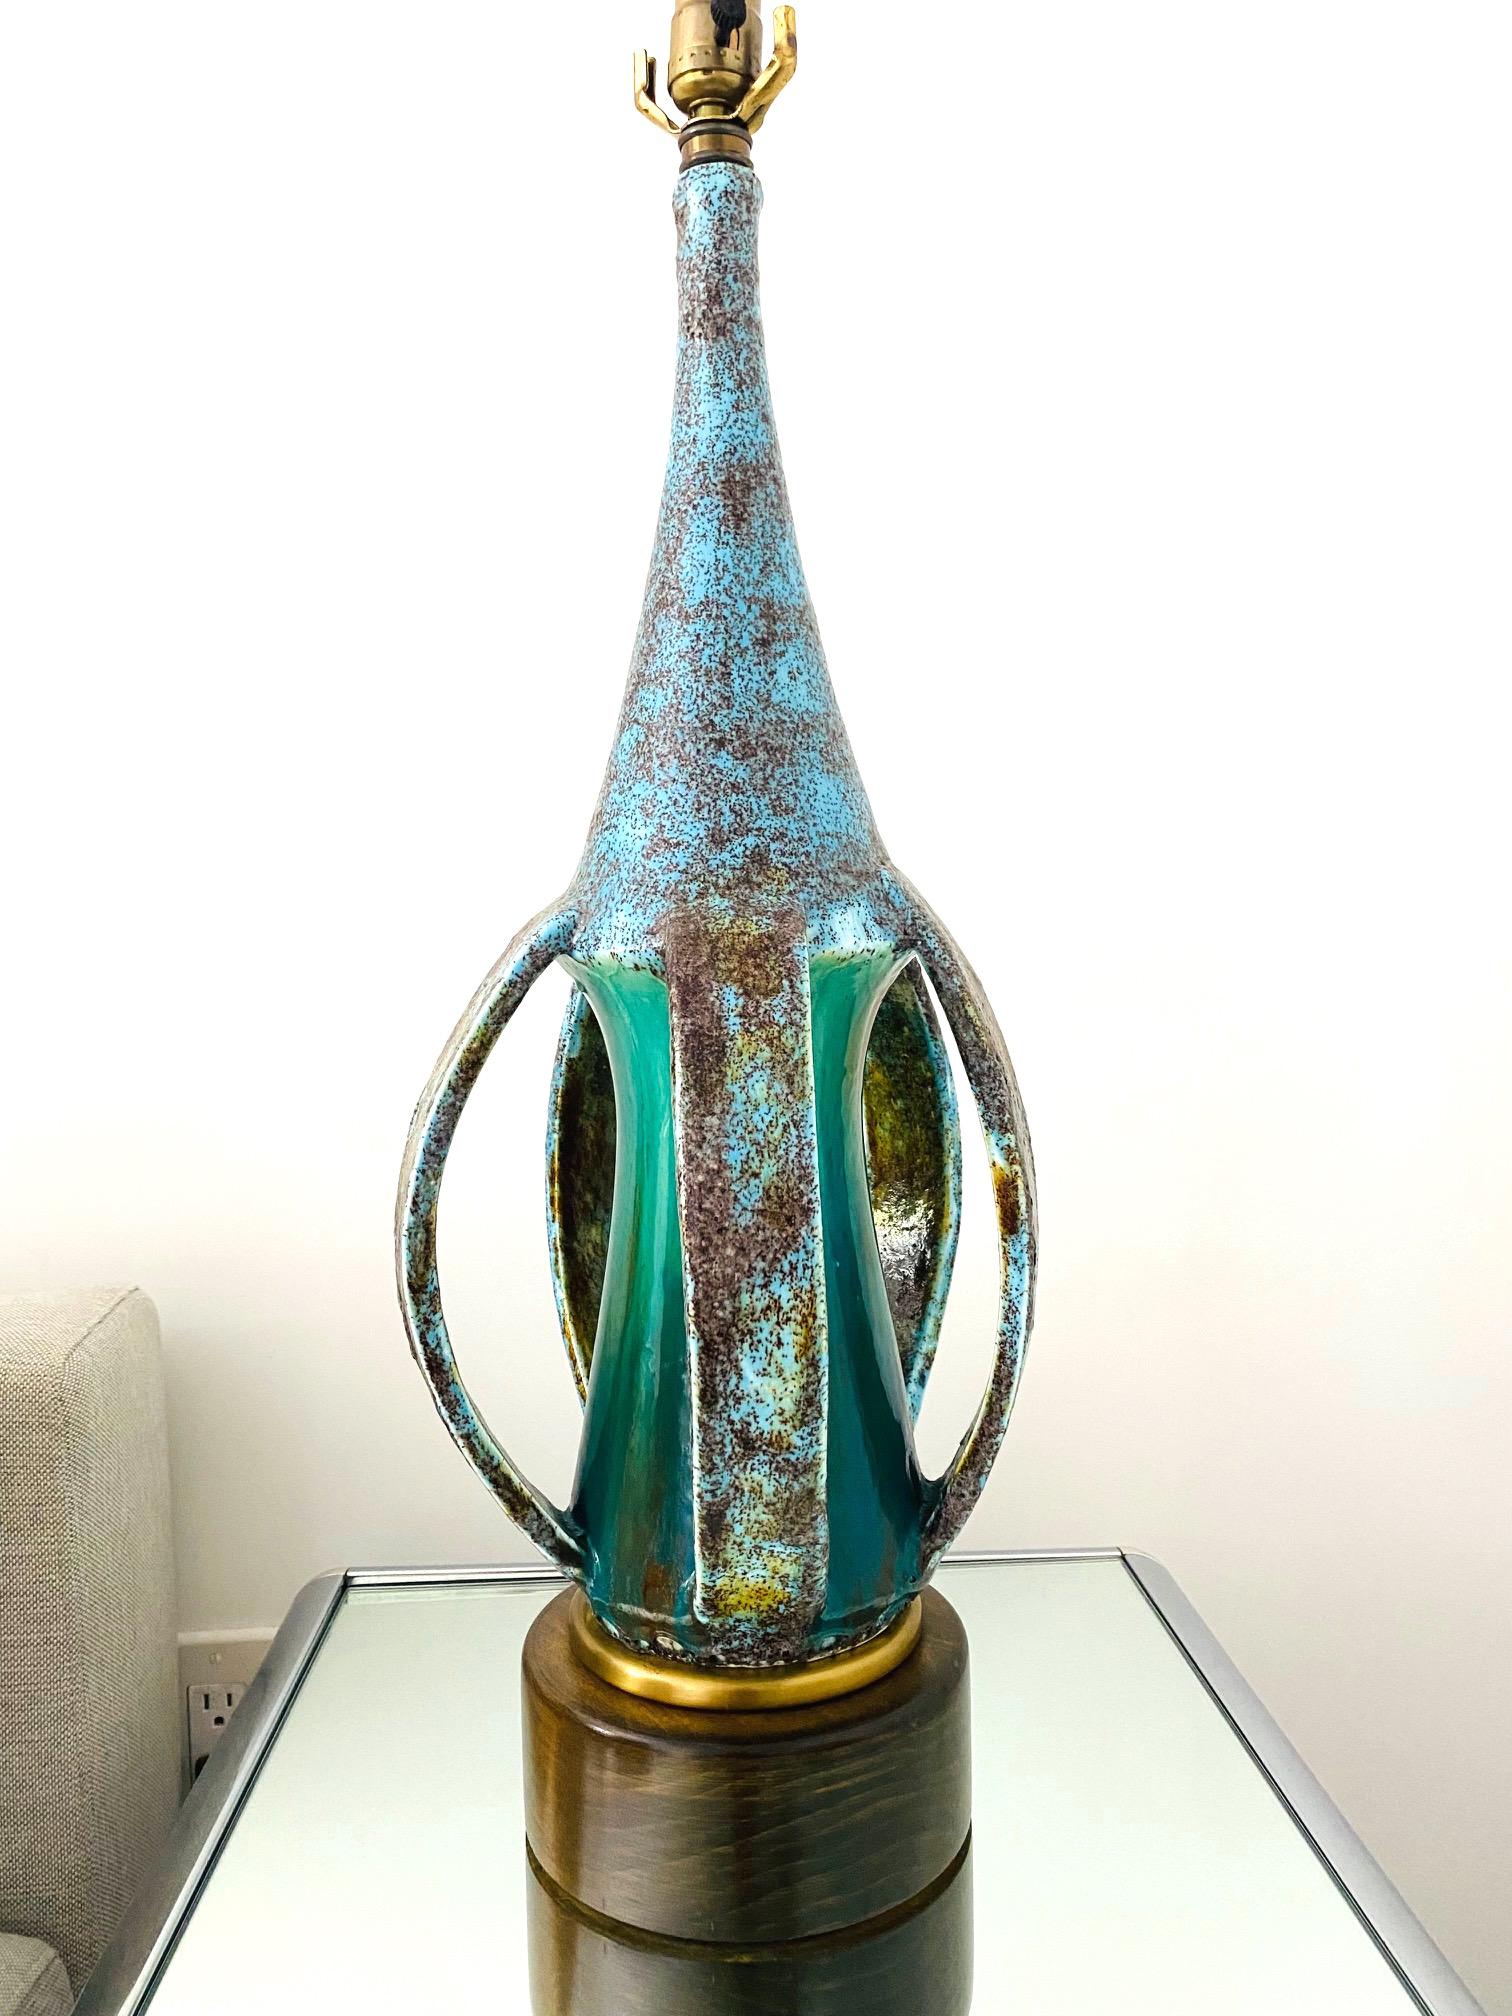 Mid-Century Modern Sculptural Pottery Lamp in Turquoise & Blue, Denmark C. 1960s For Sale 5